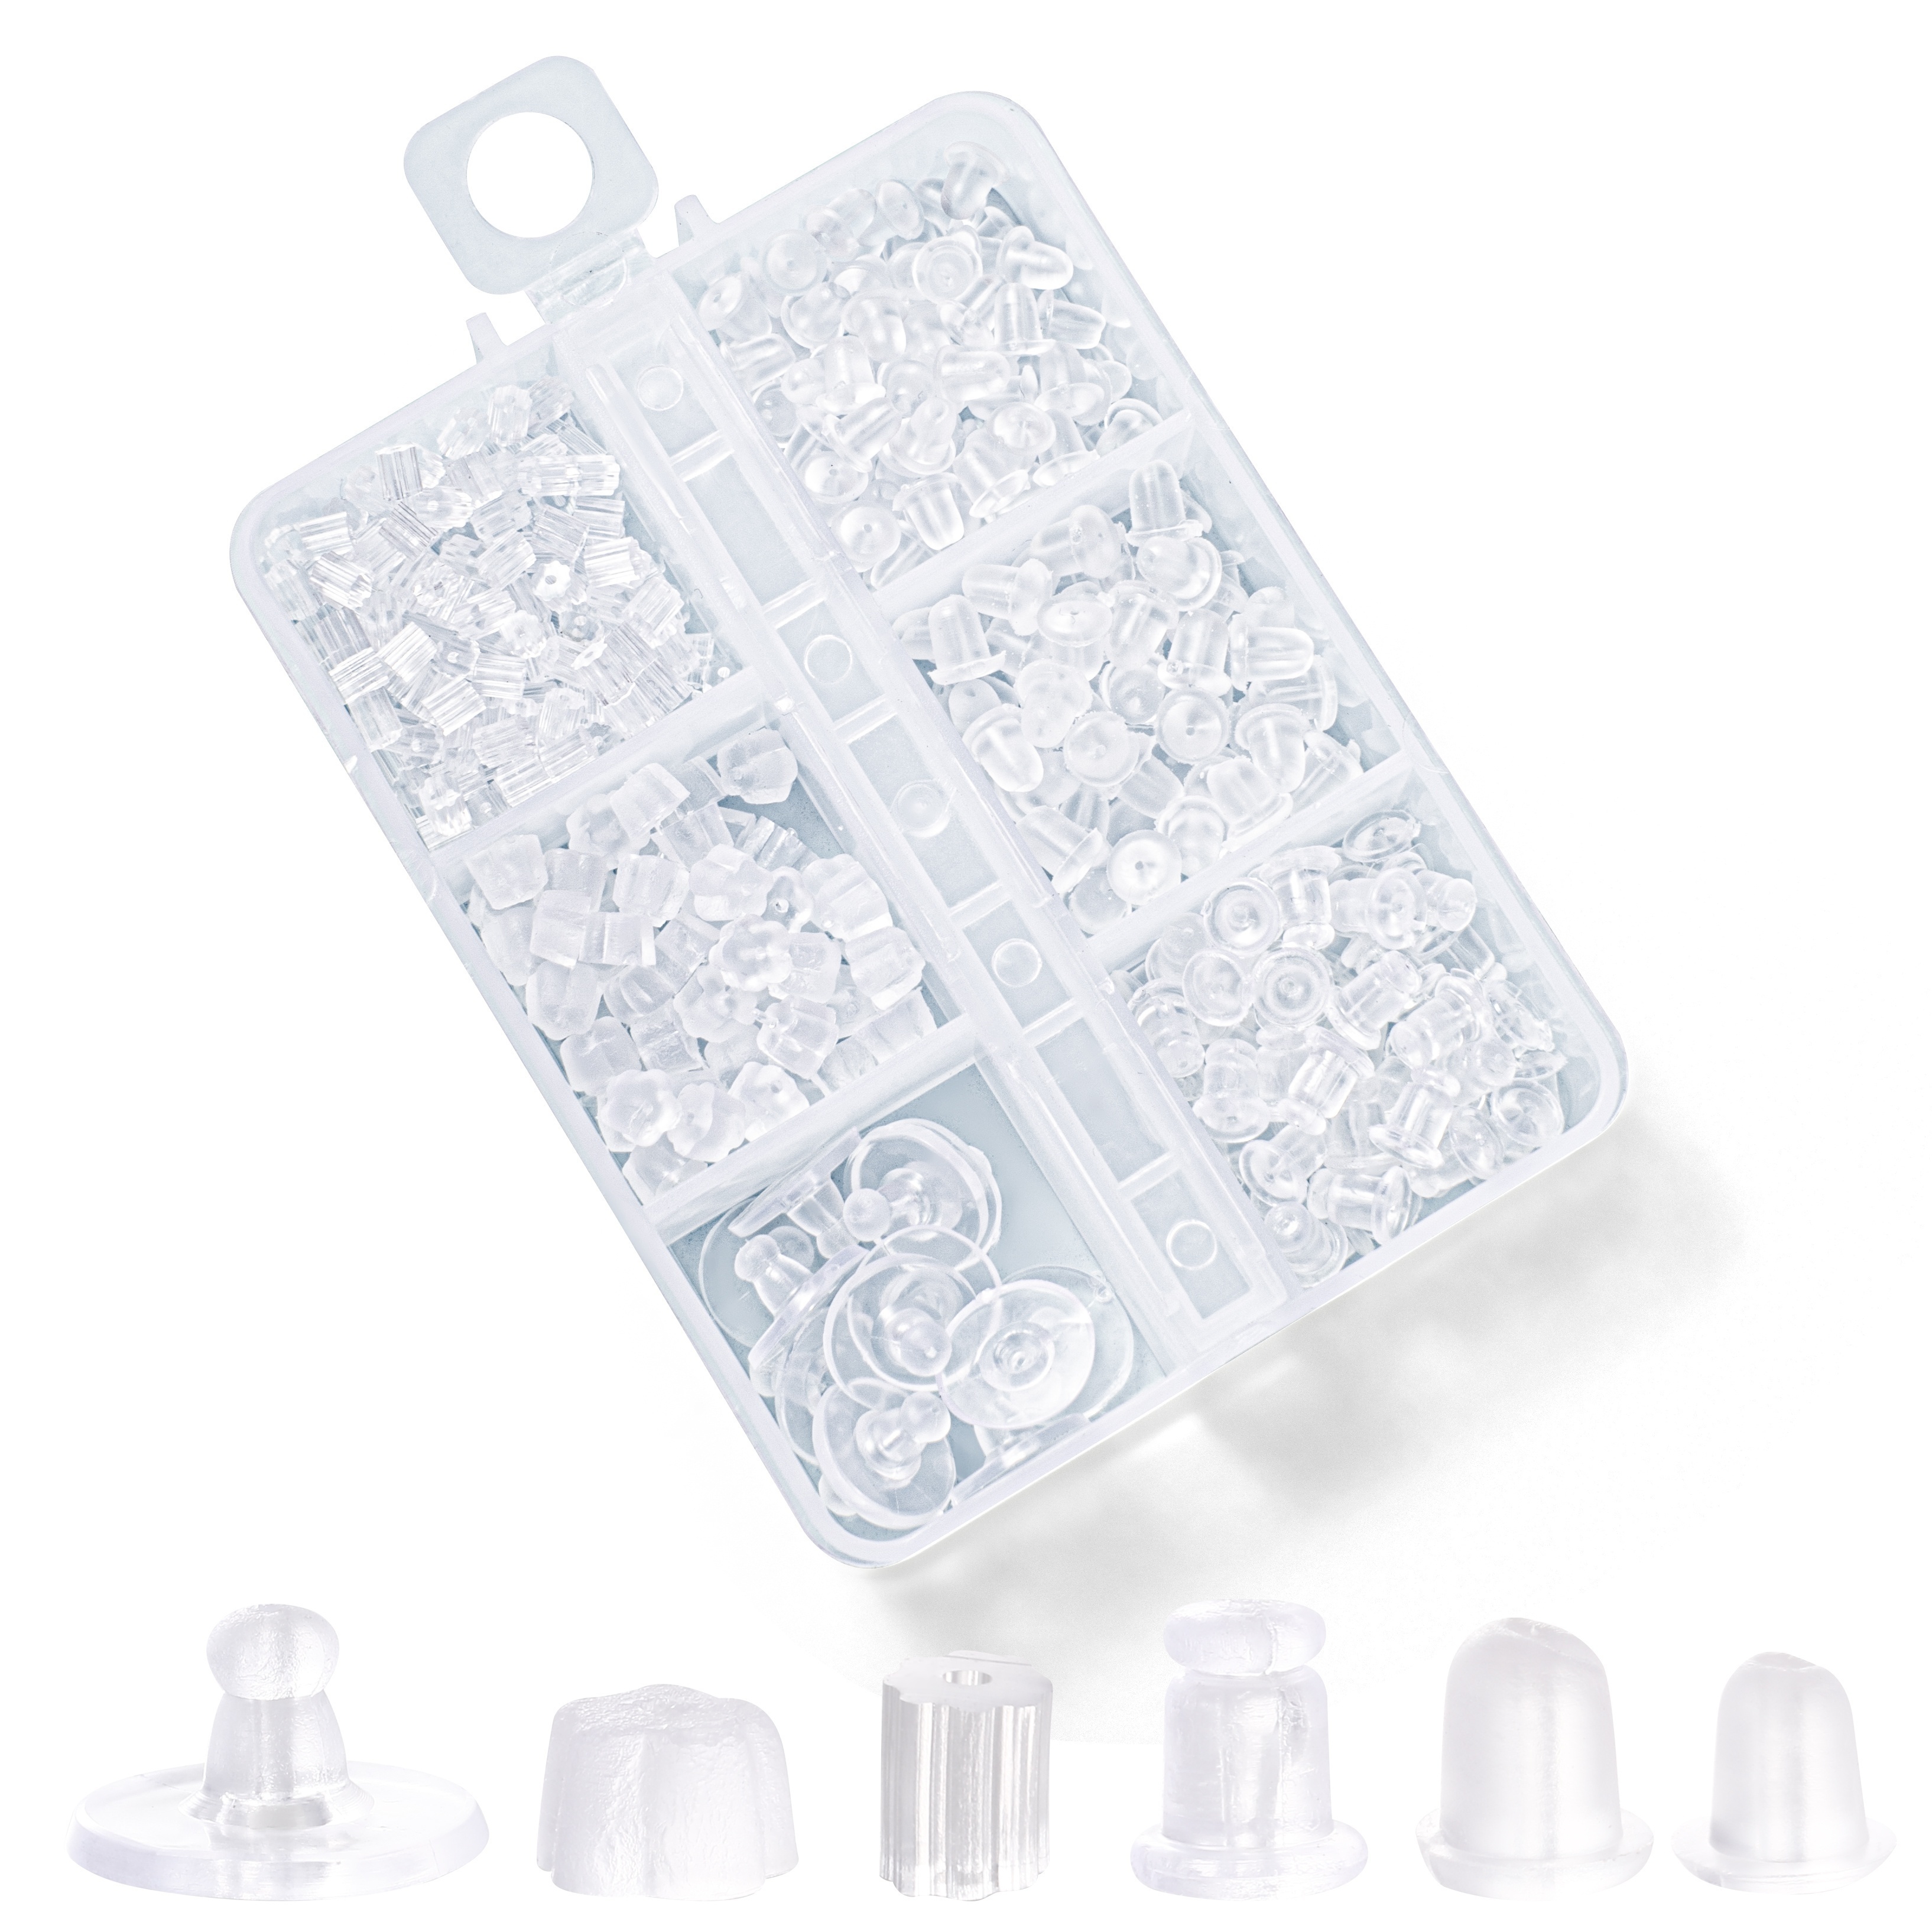 Replacement Earring Backing Set